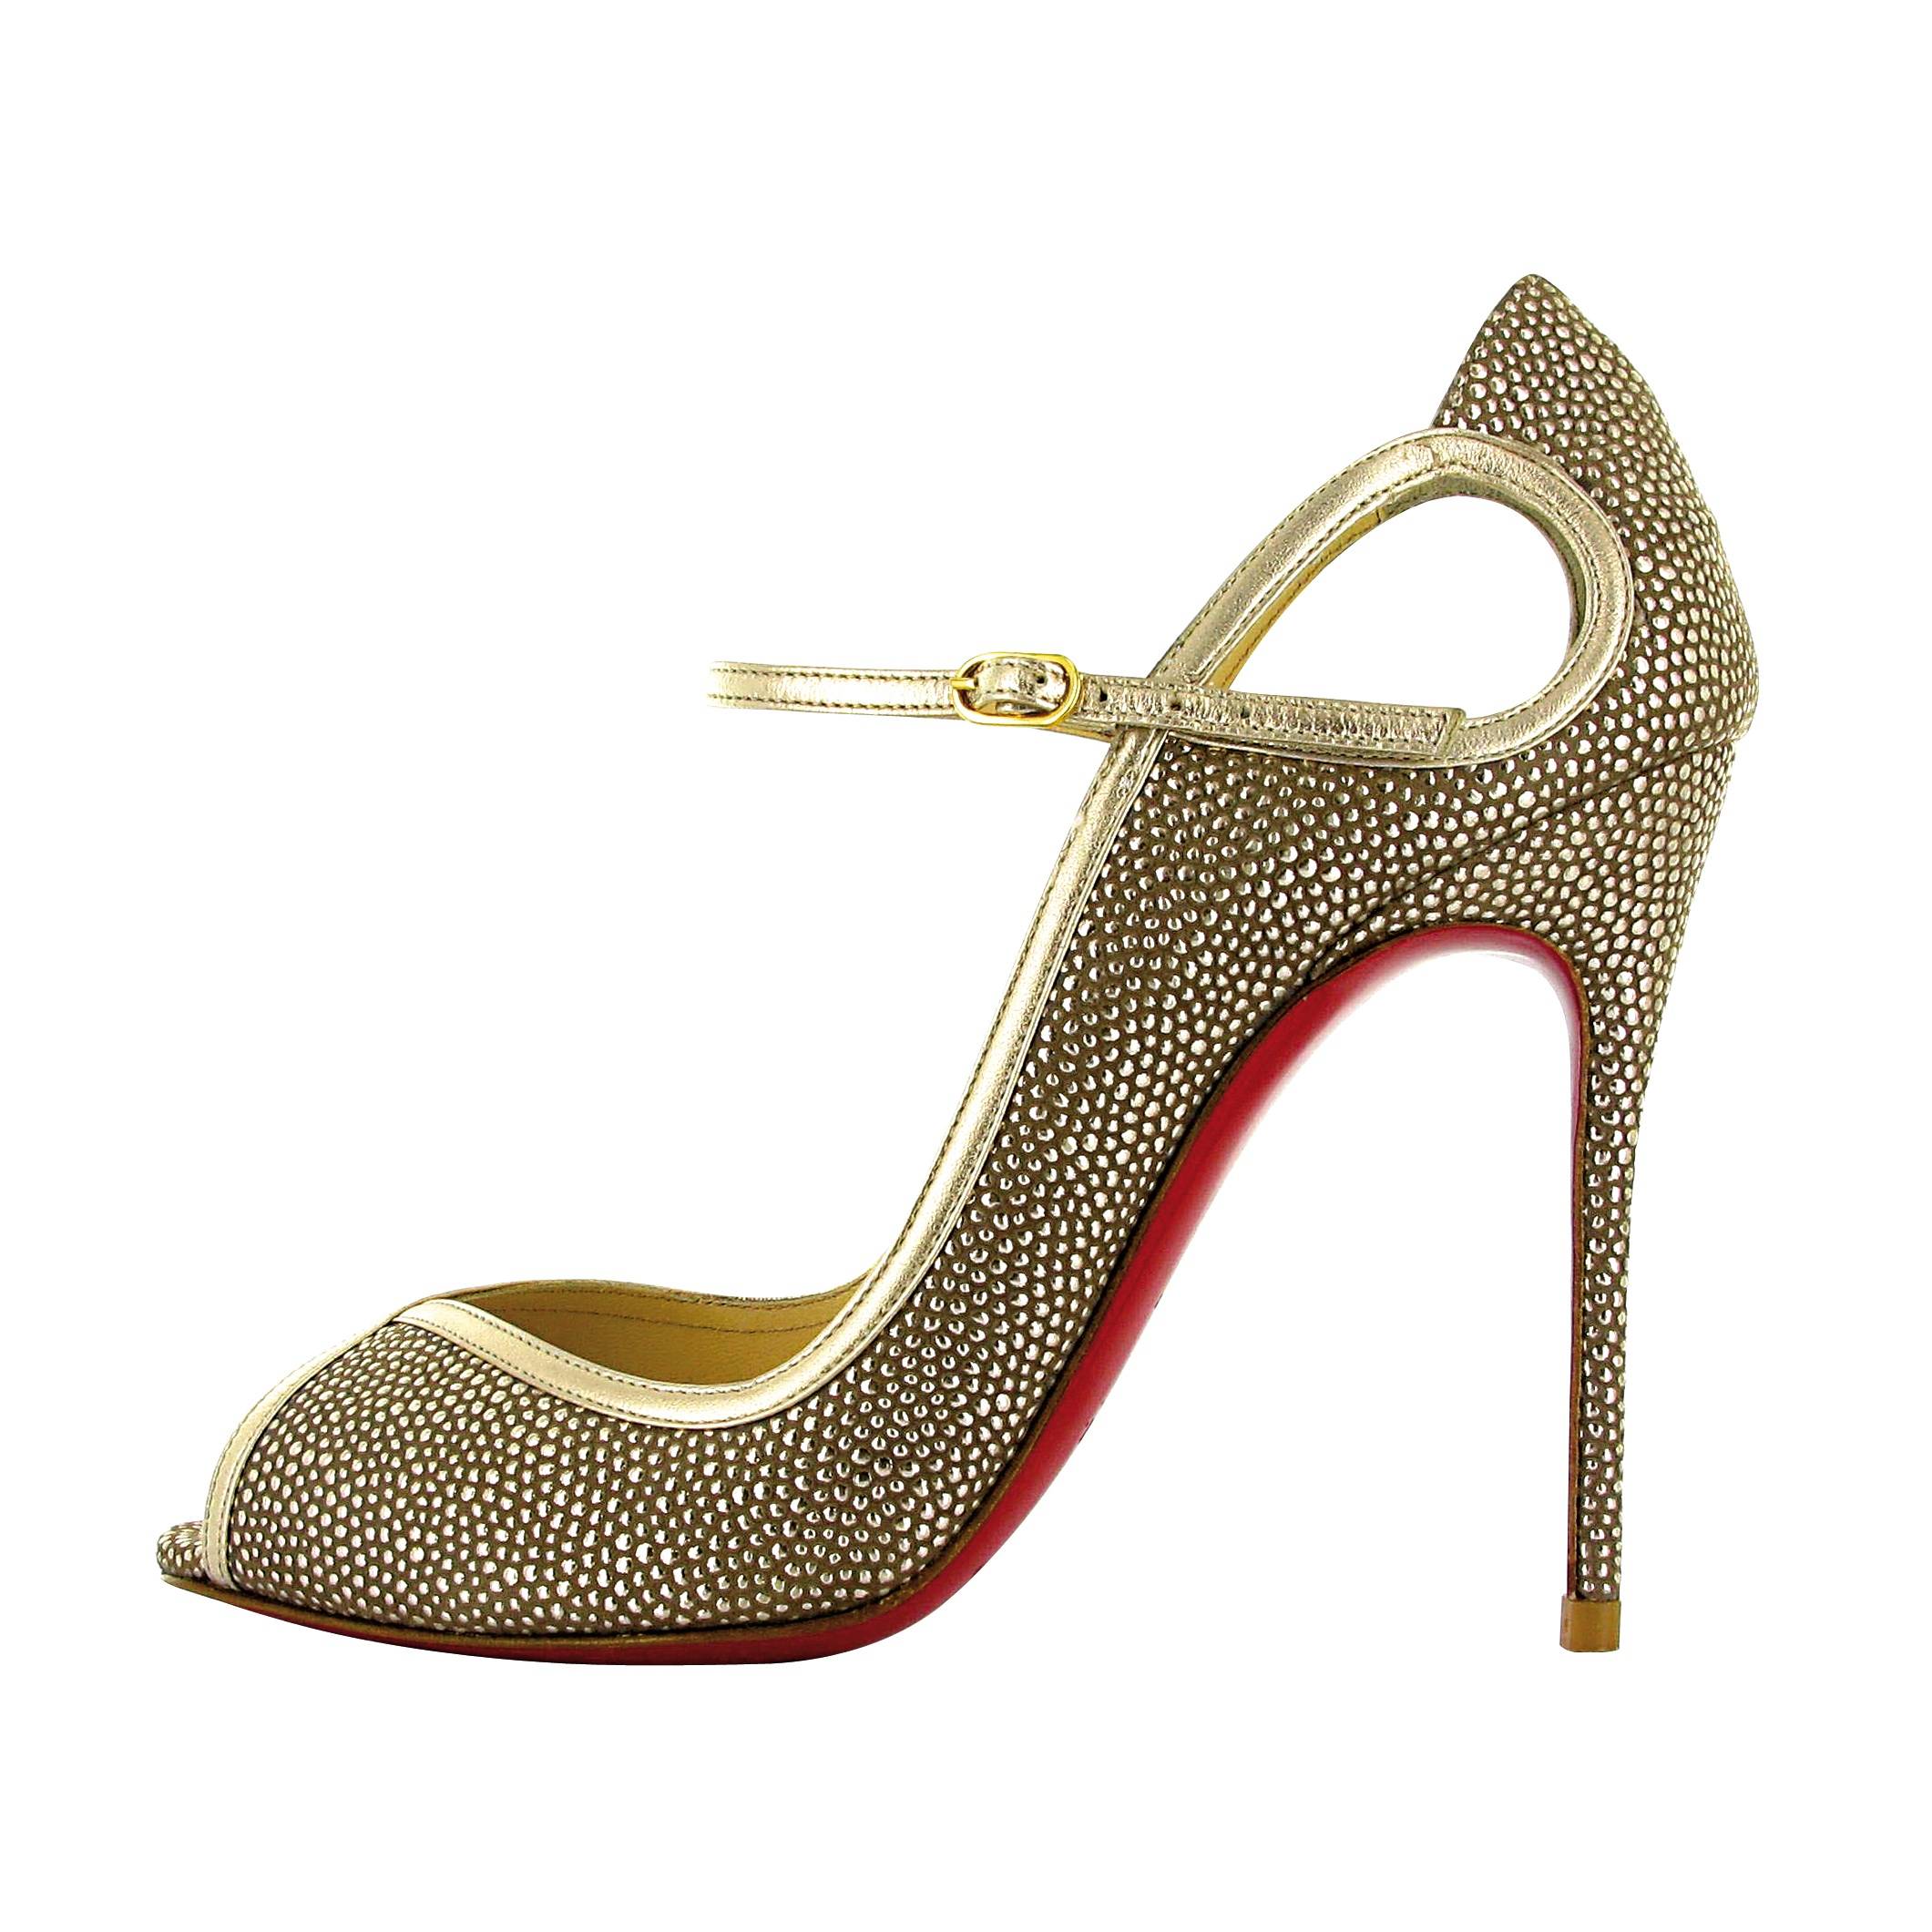 Christian Louboutin To Open in Riyadh This June - Haute Living